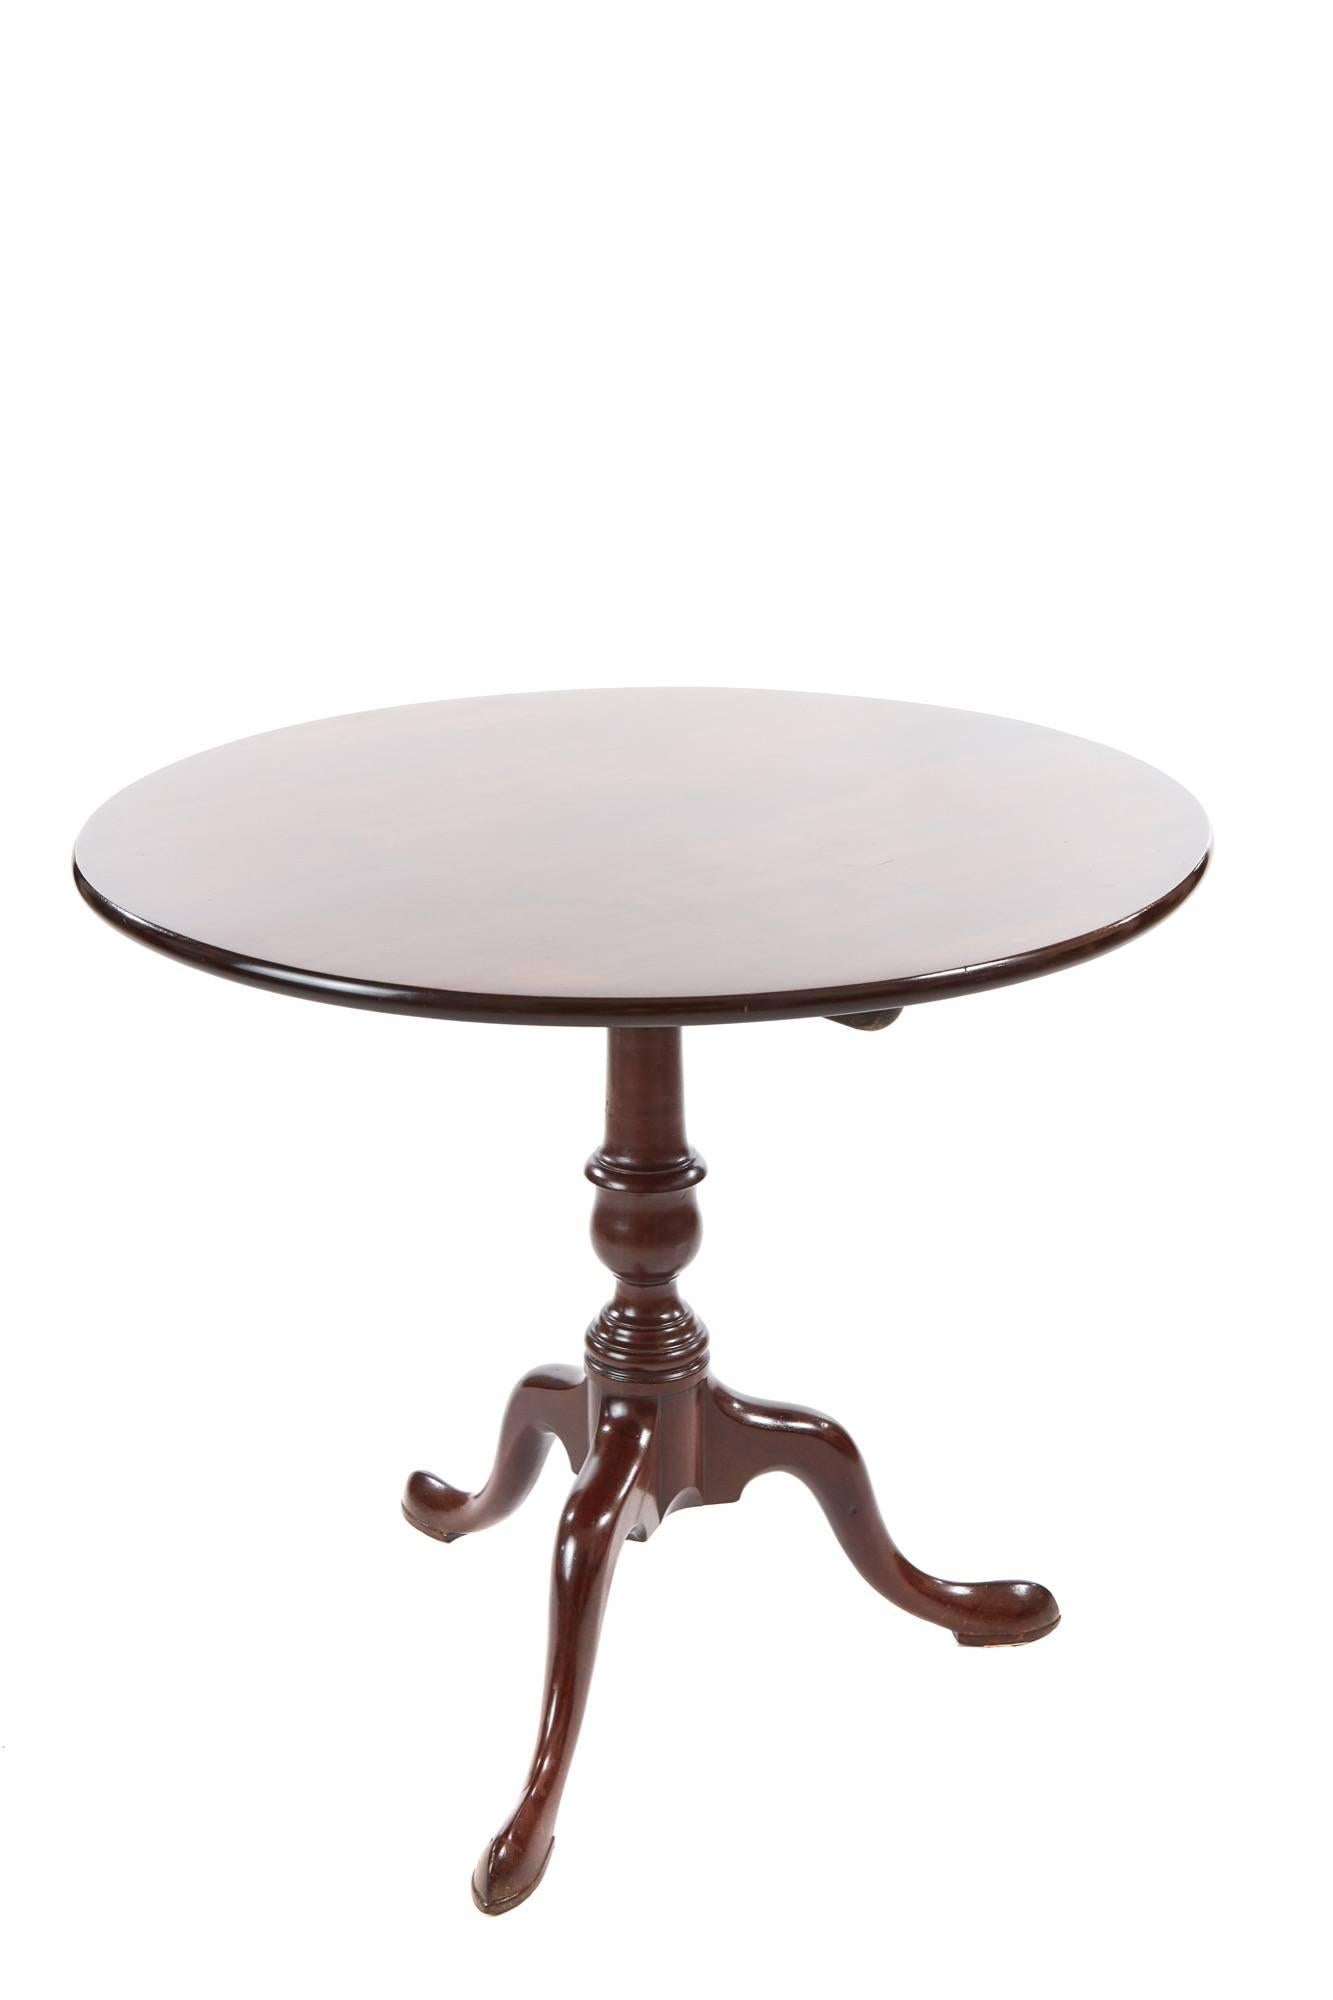 George III mahogany tripod table with a round solid mahogany top on a turned pedestal column raised on three shaped cabriole legs with pad feet
Lovely color and condition.